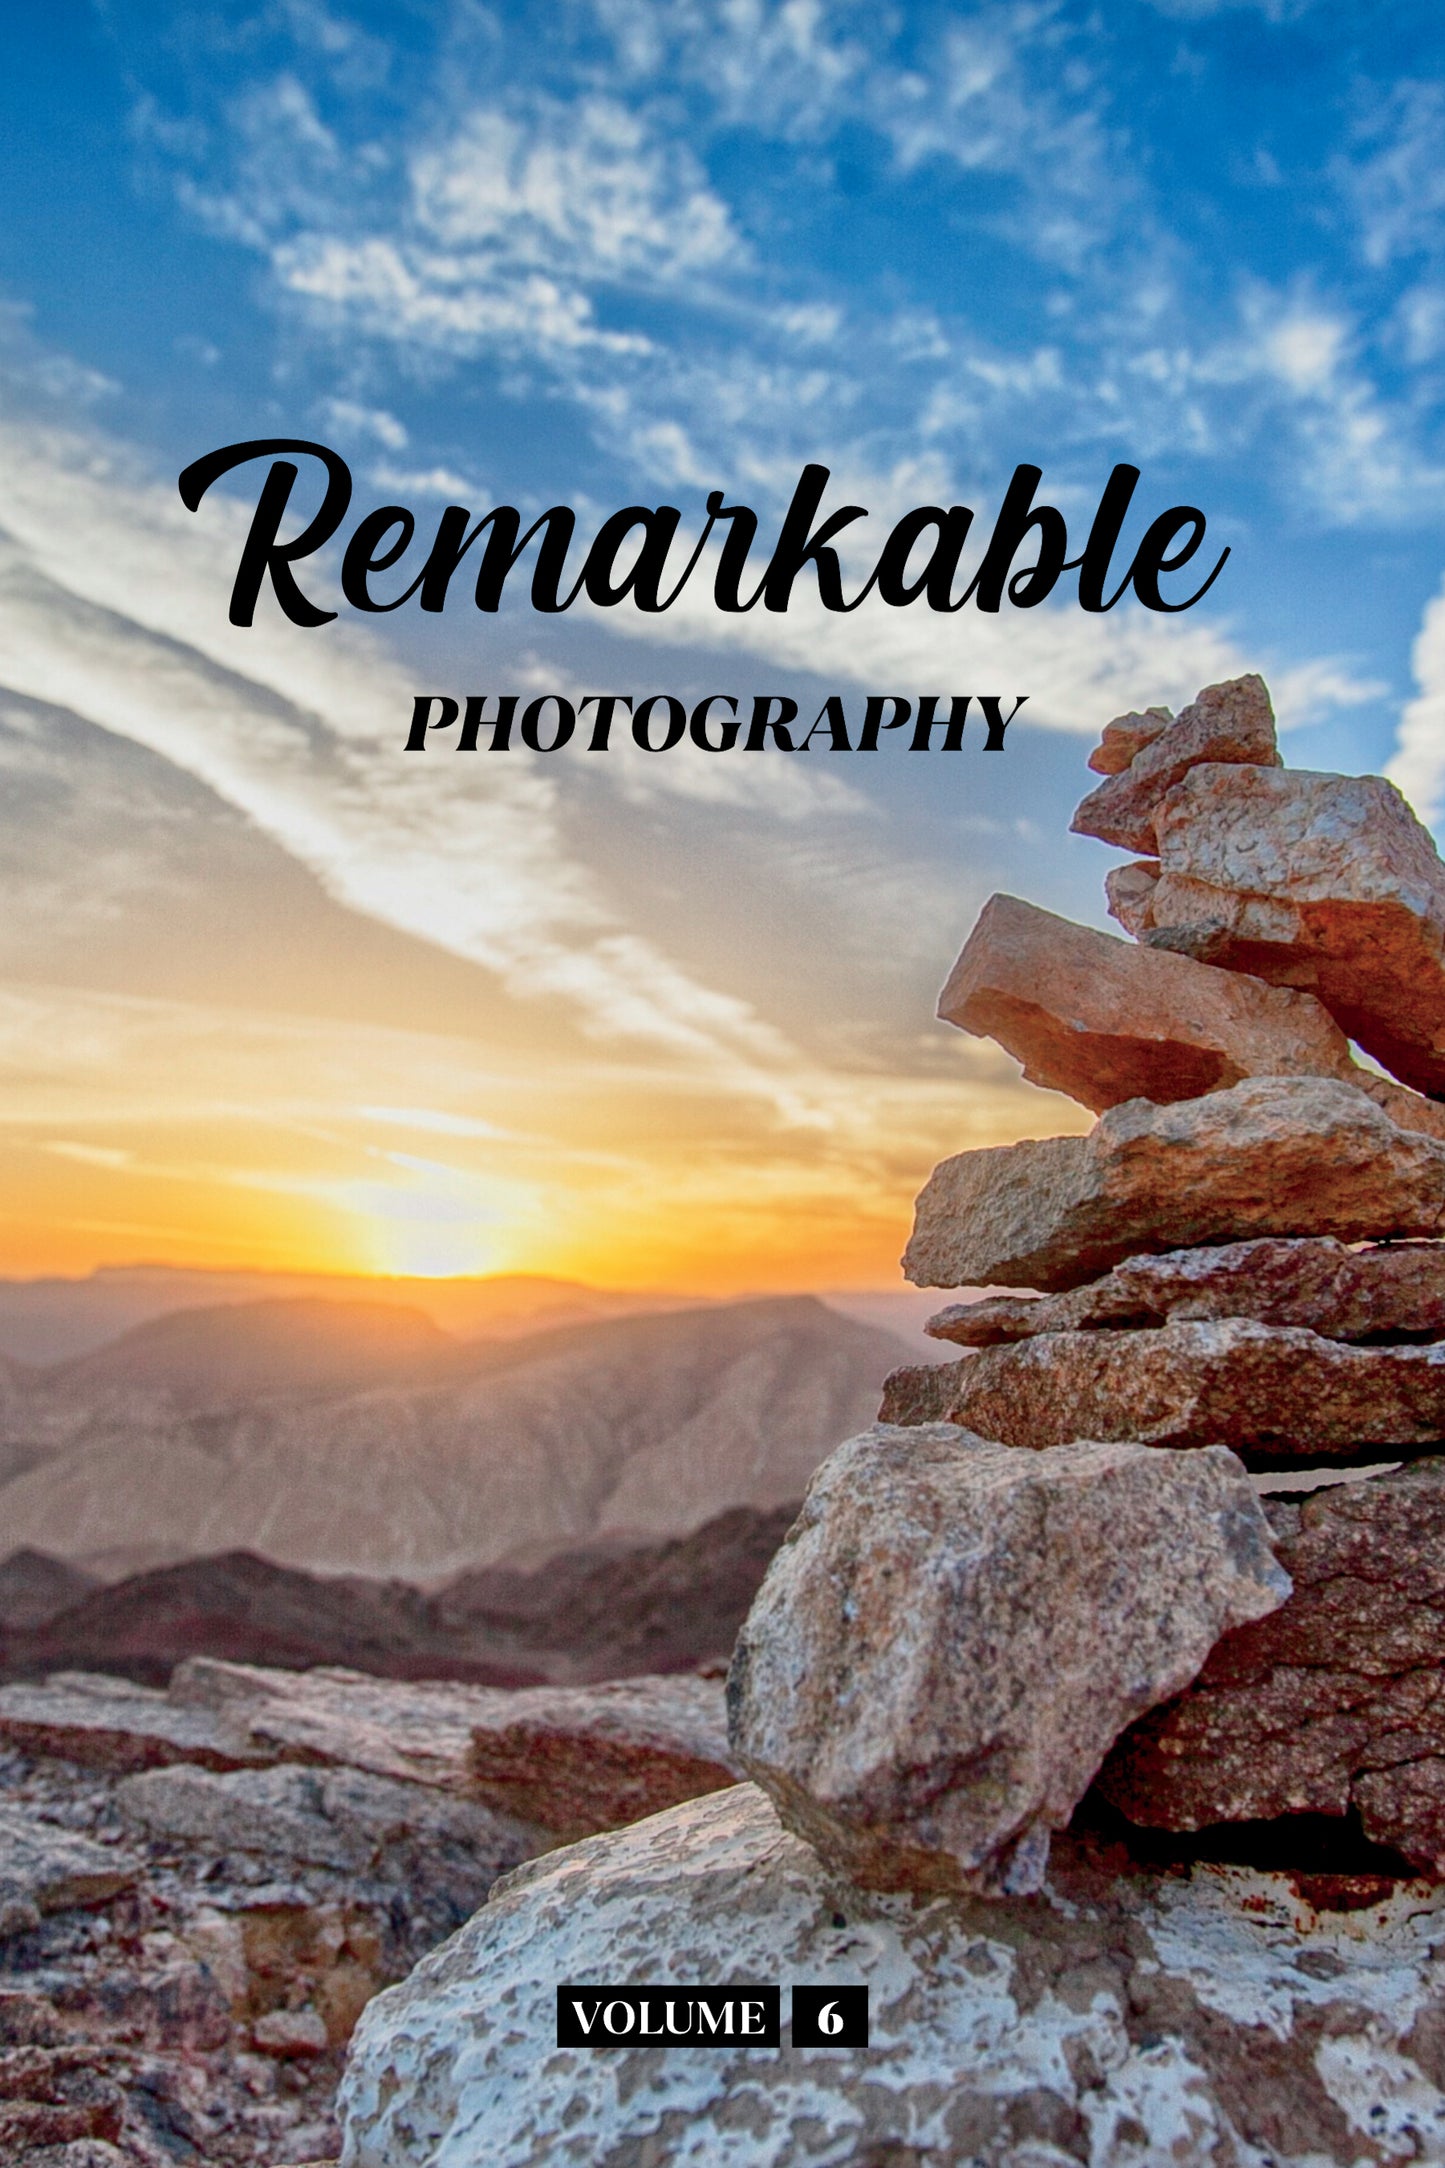 Remarkable Photography Volume 6 (Physical Book)